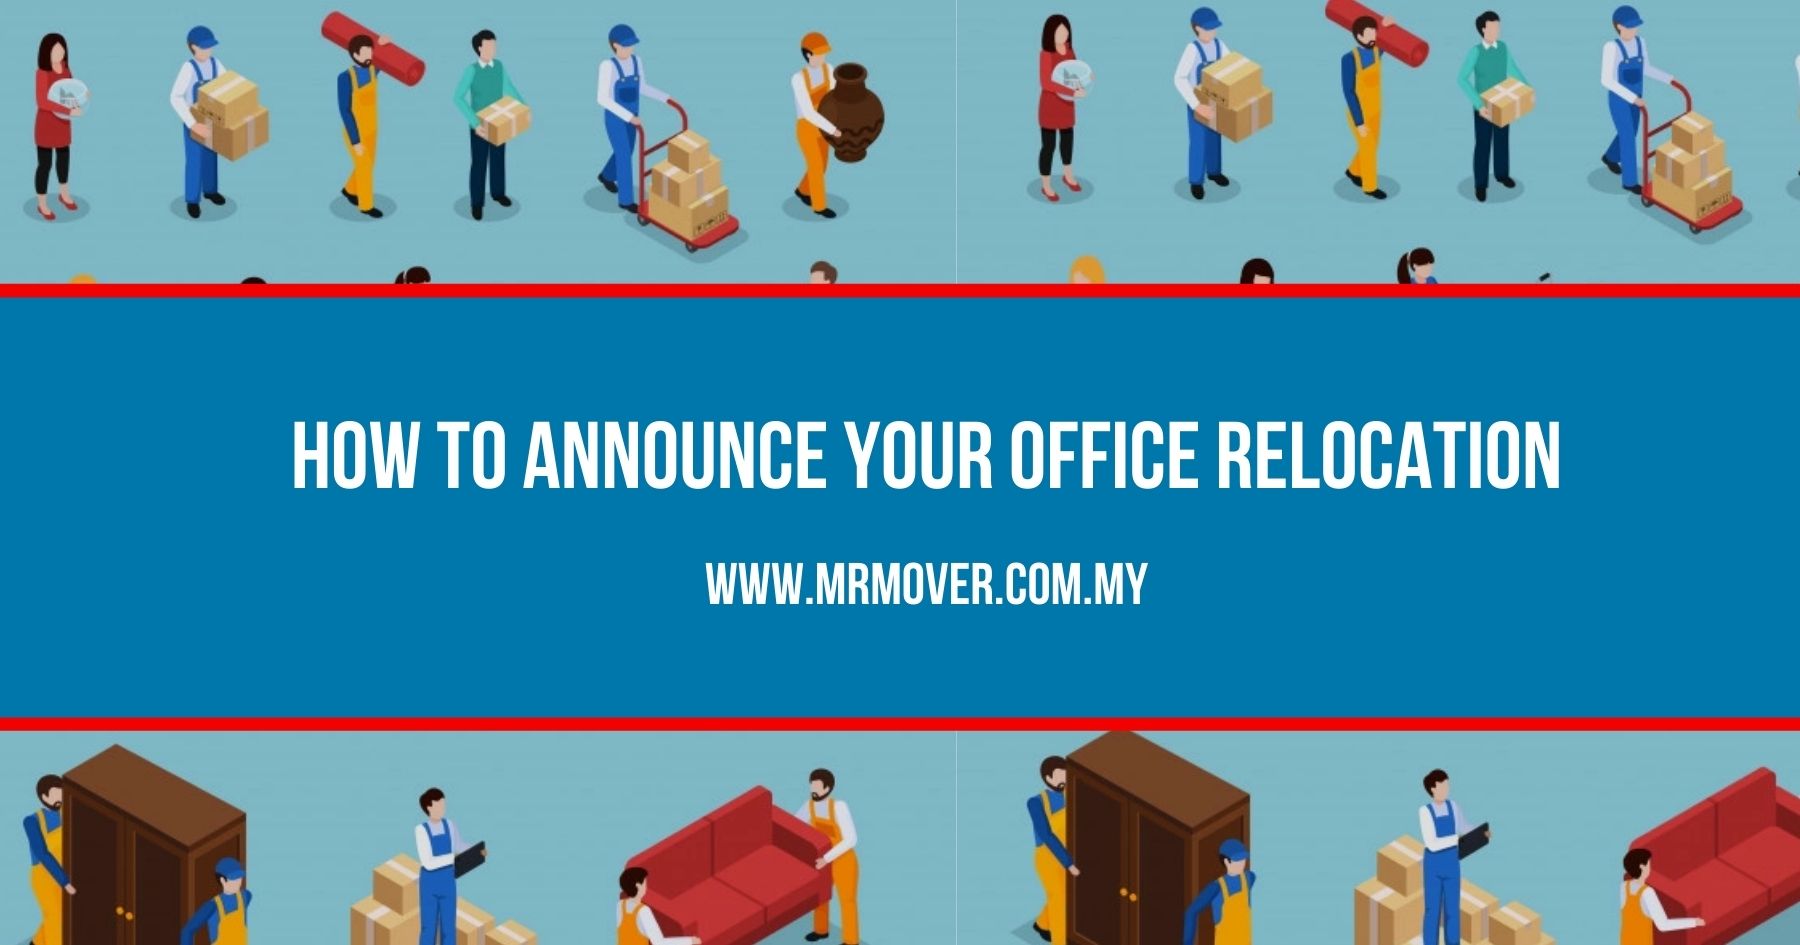 How to Announce Your Office Relocation